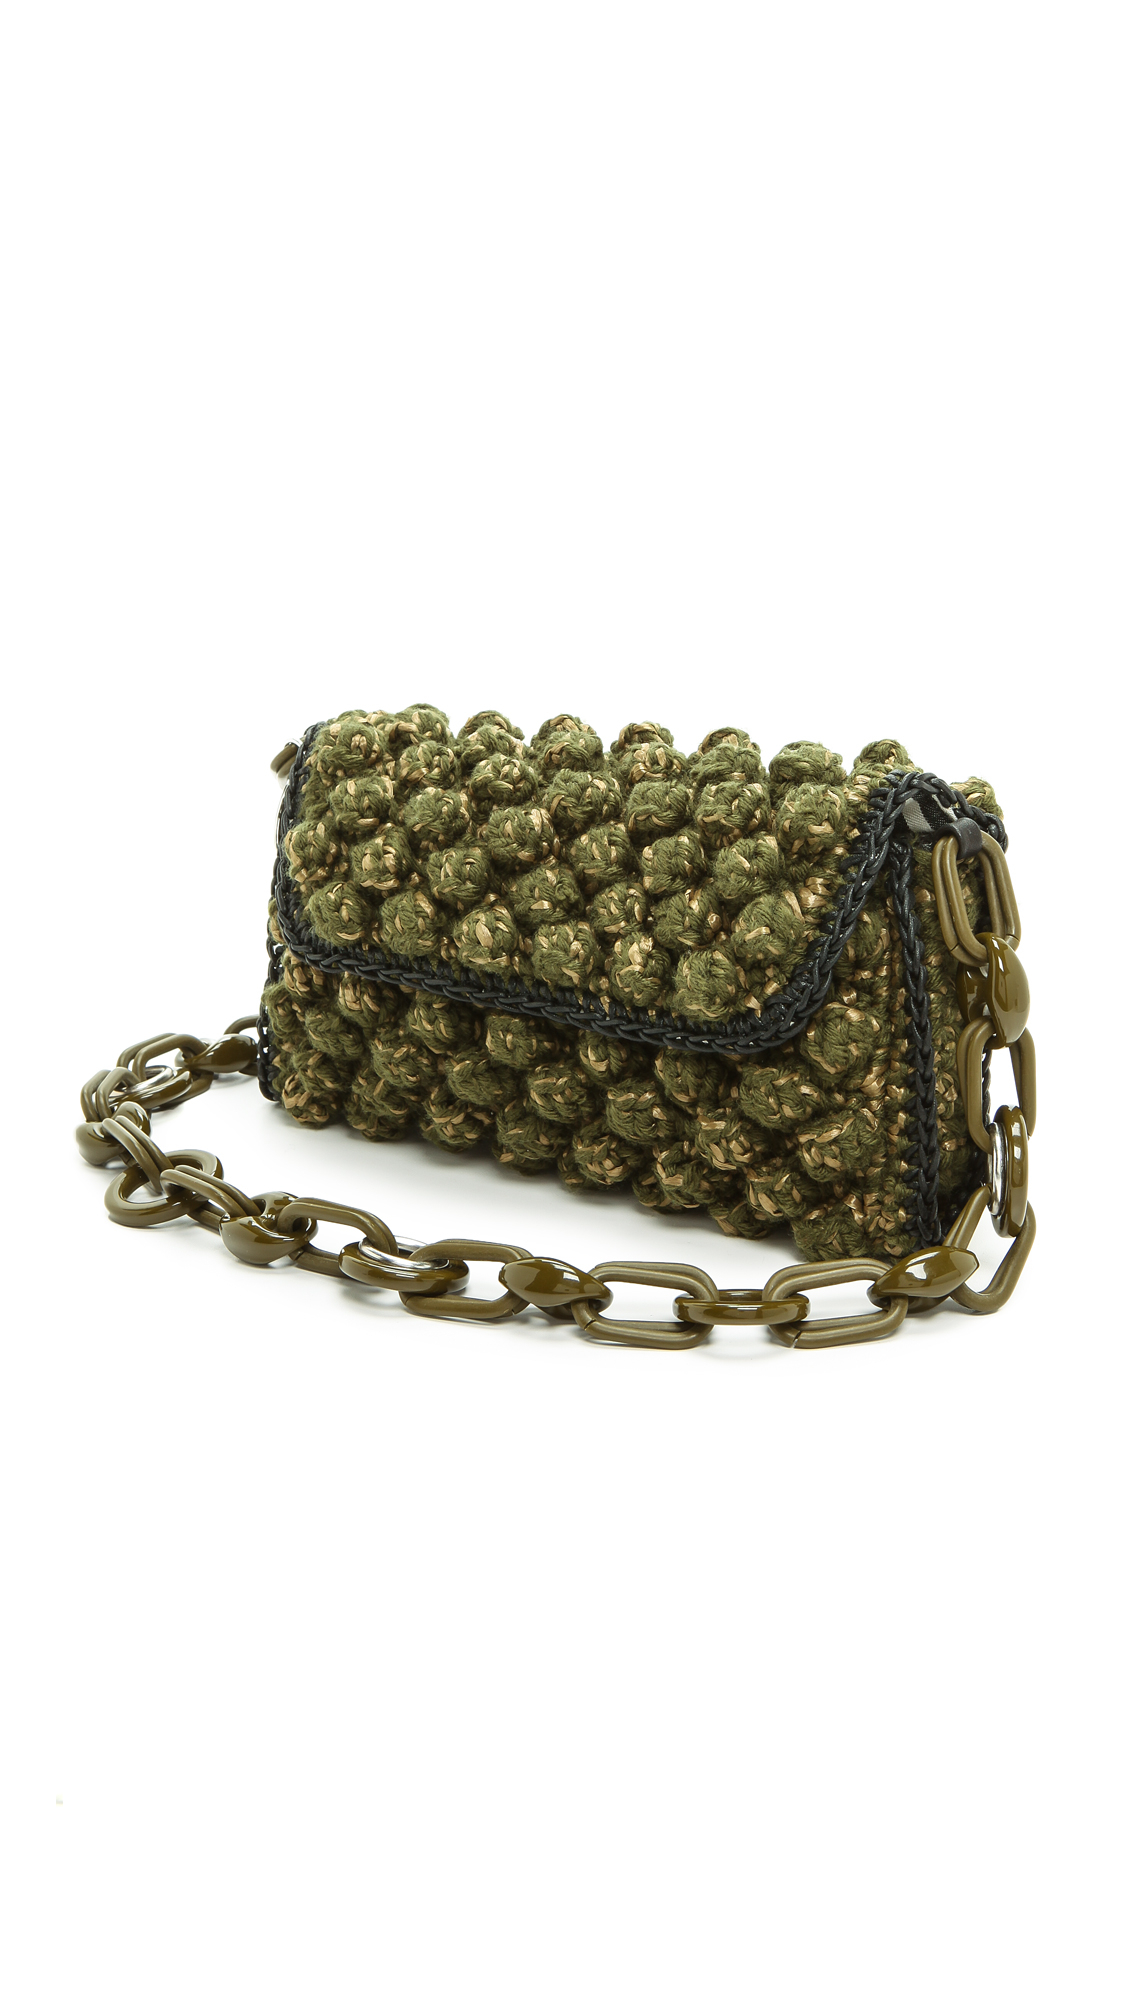 M Missoni Boucle Knit Bag - Olive in ...